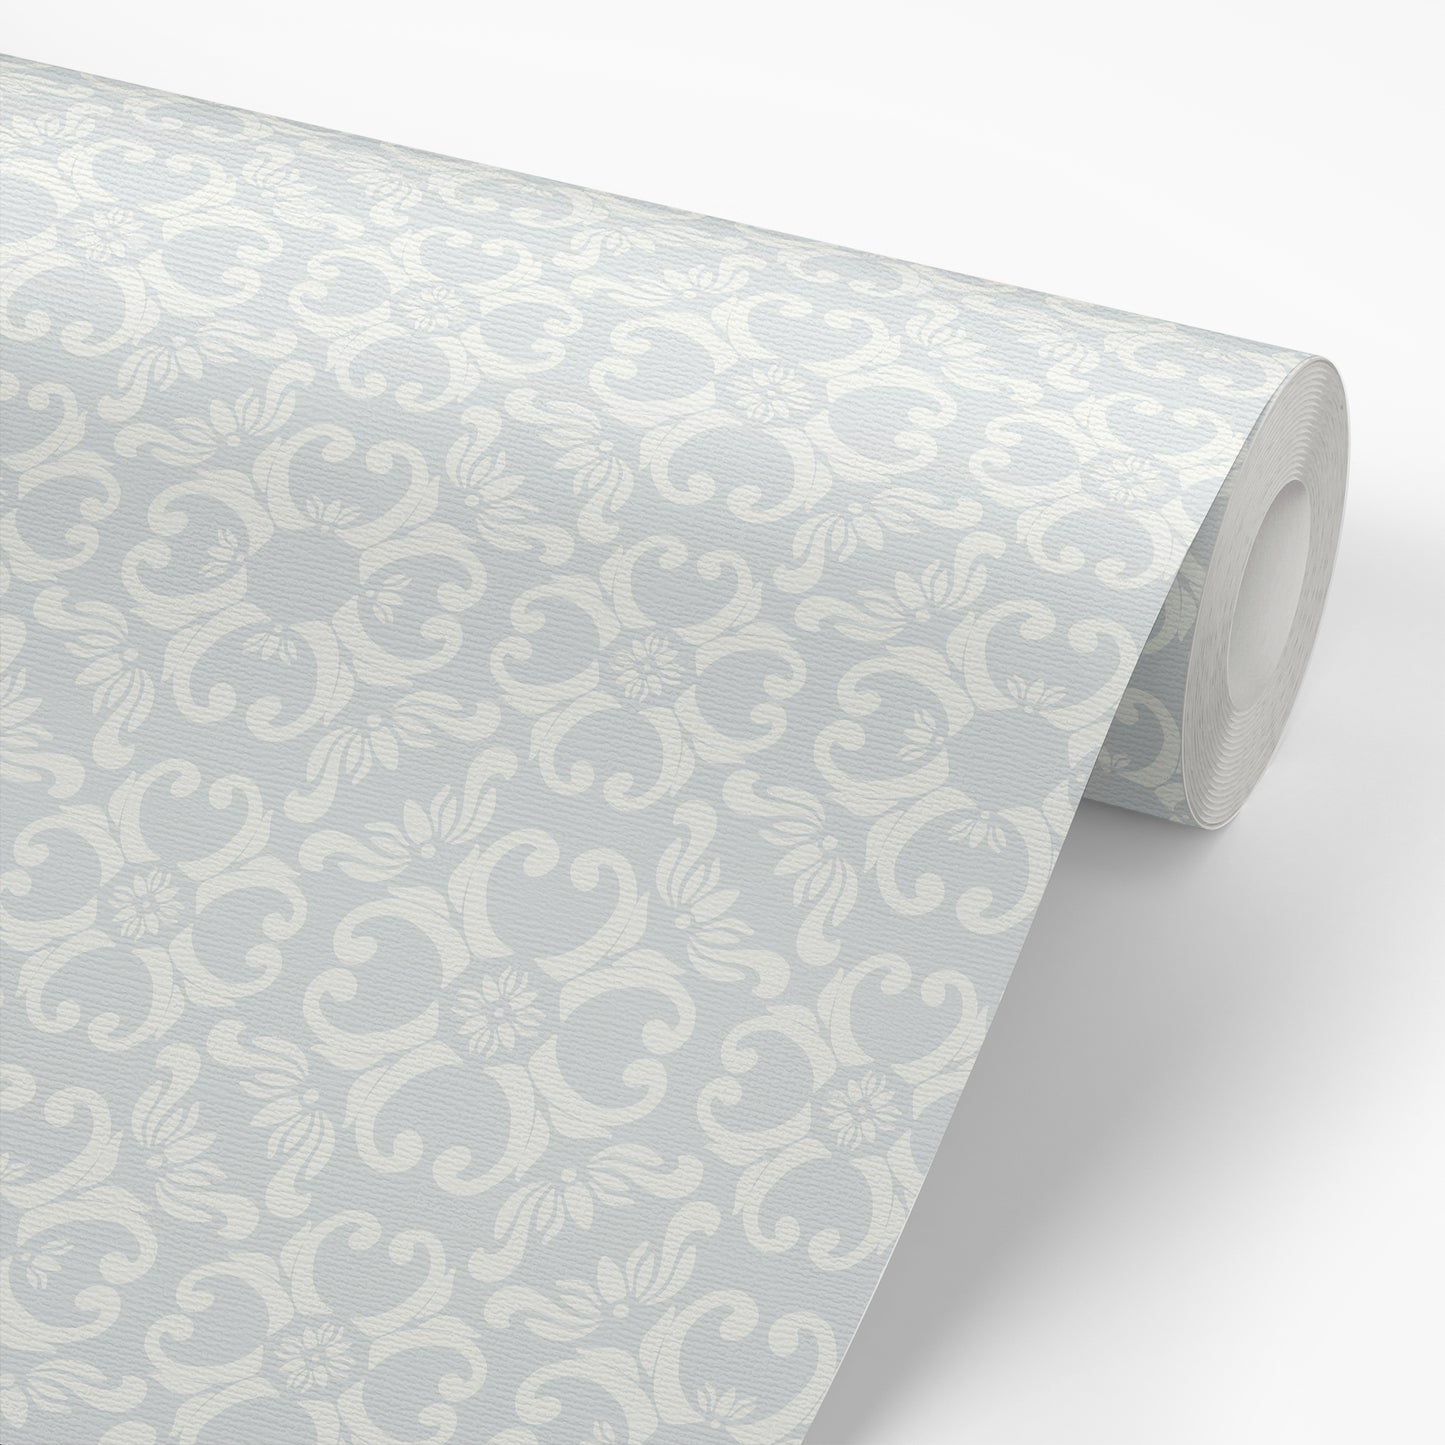 Ayara's peel and stick removable Spanish Tiles Wallpaper in Snow featured on a wallpaper roll.